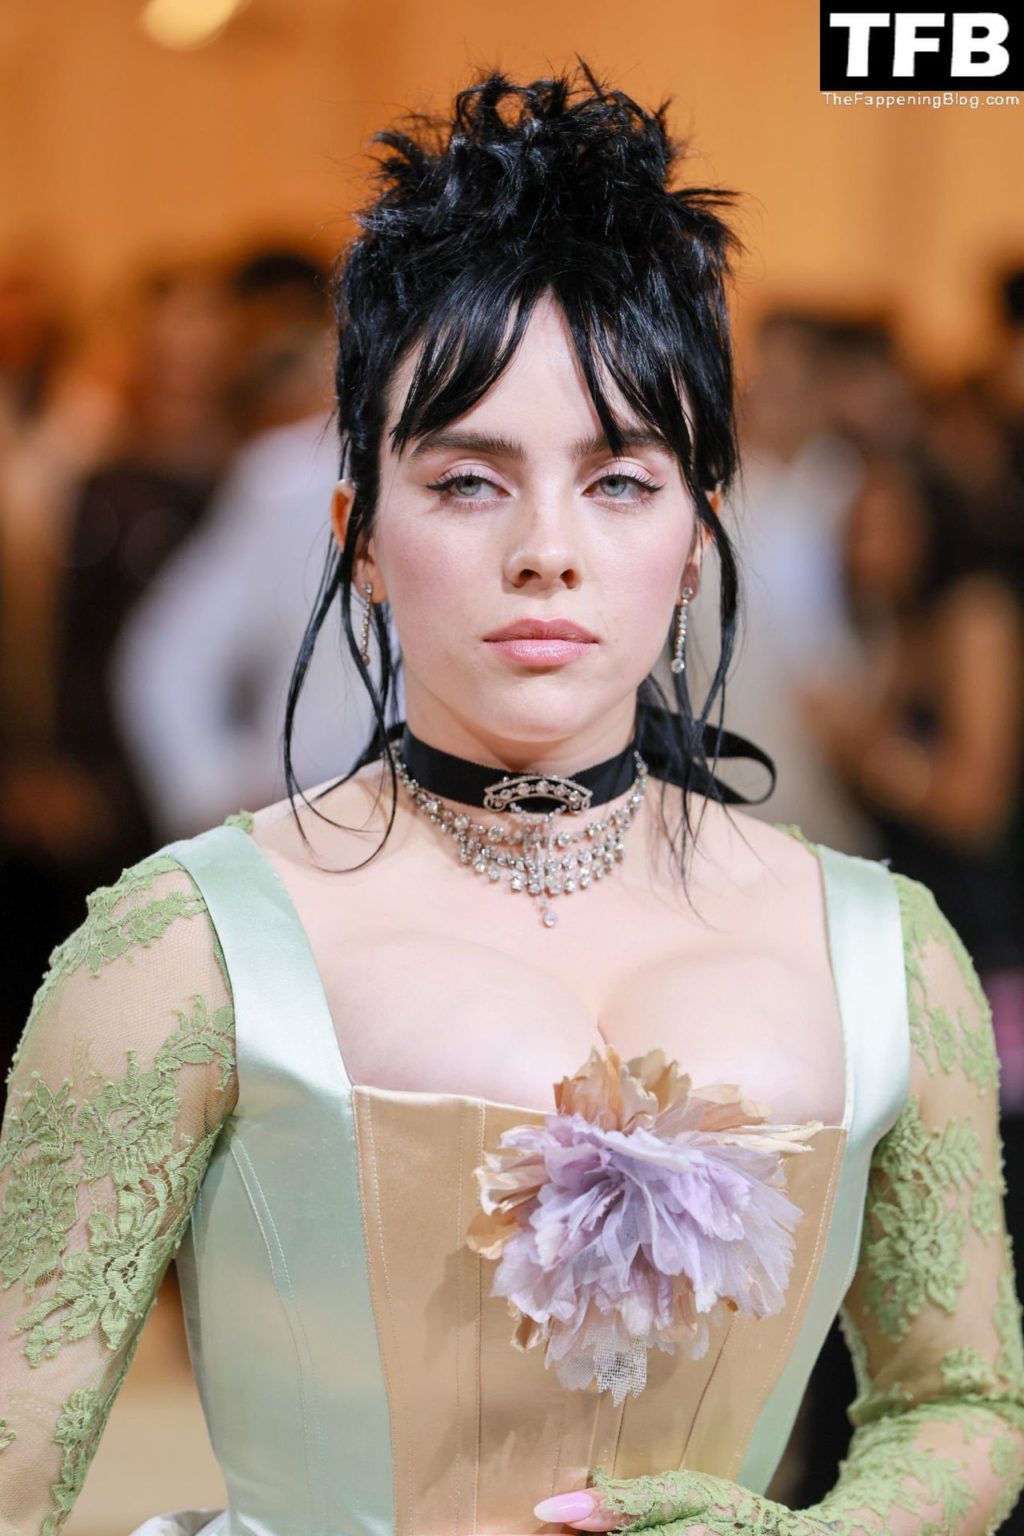 Billie Eilish Sexy The Fappening Blog 65 1024x1536 - Billie Eilish Showcases Nice Cleavage at The 2022 Met Gala in NYC (155 Photos)